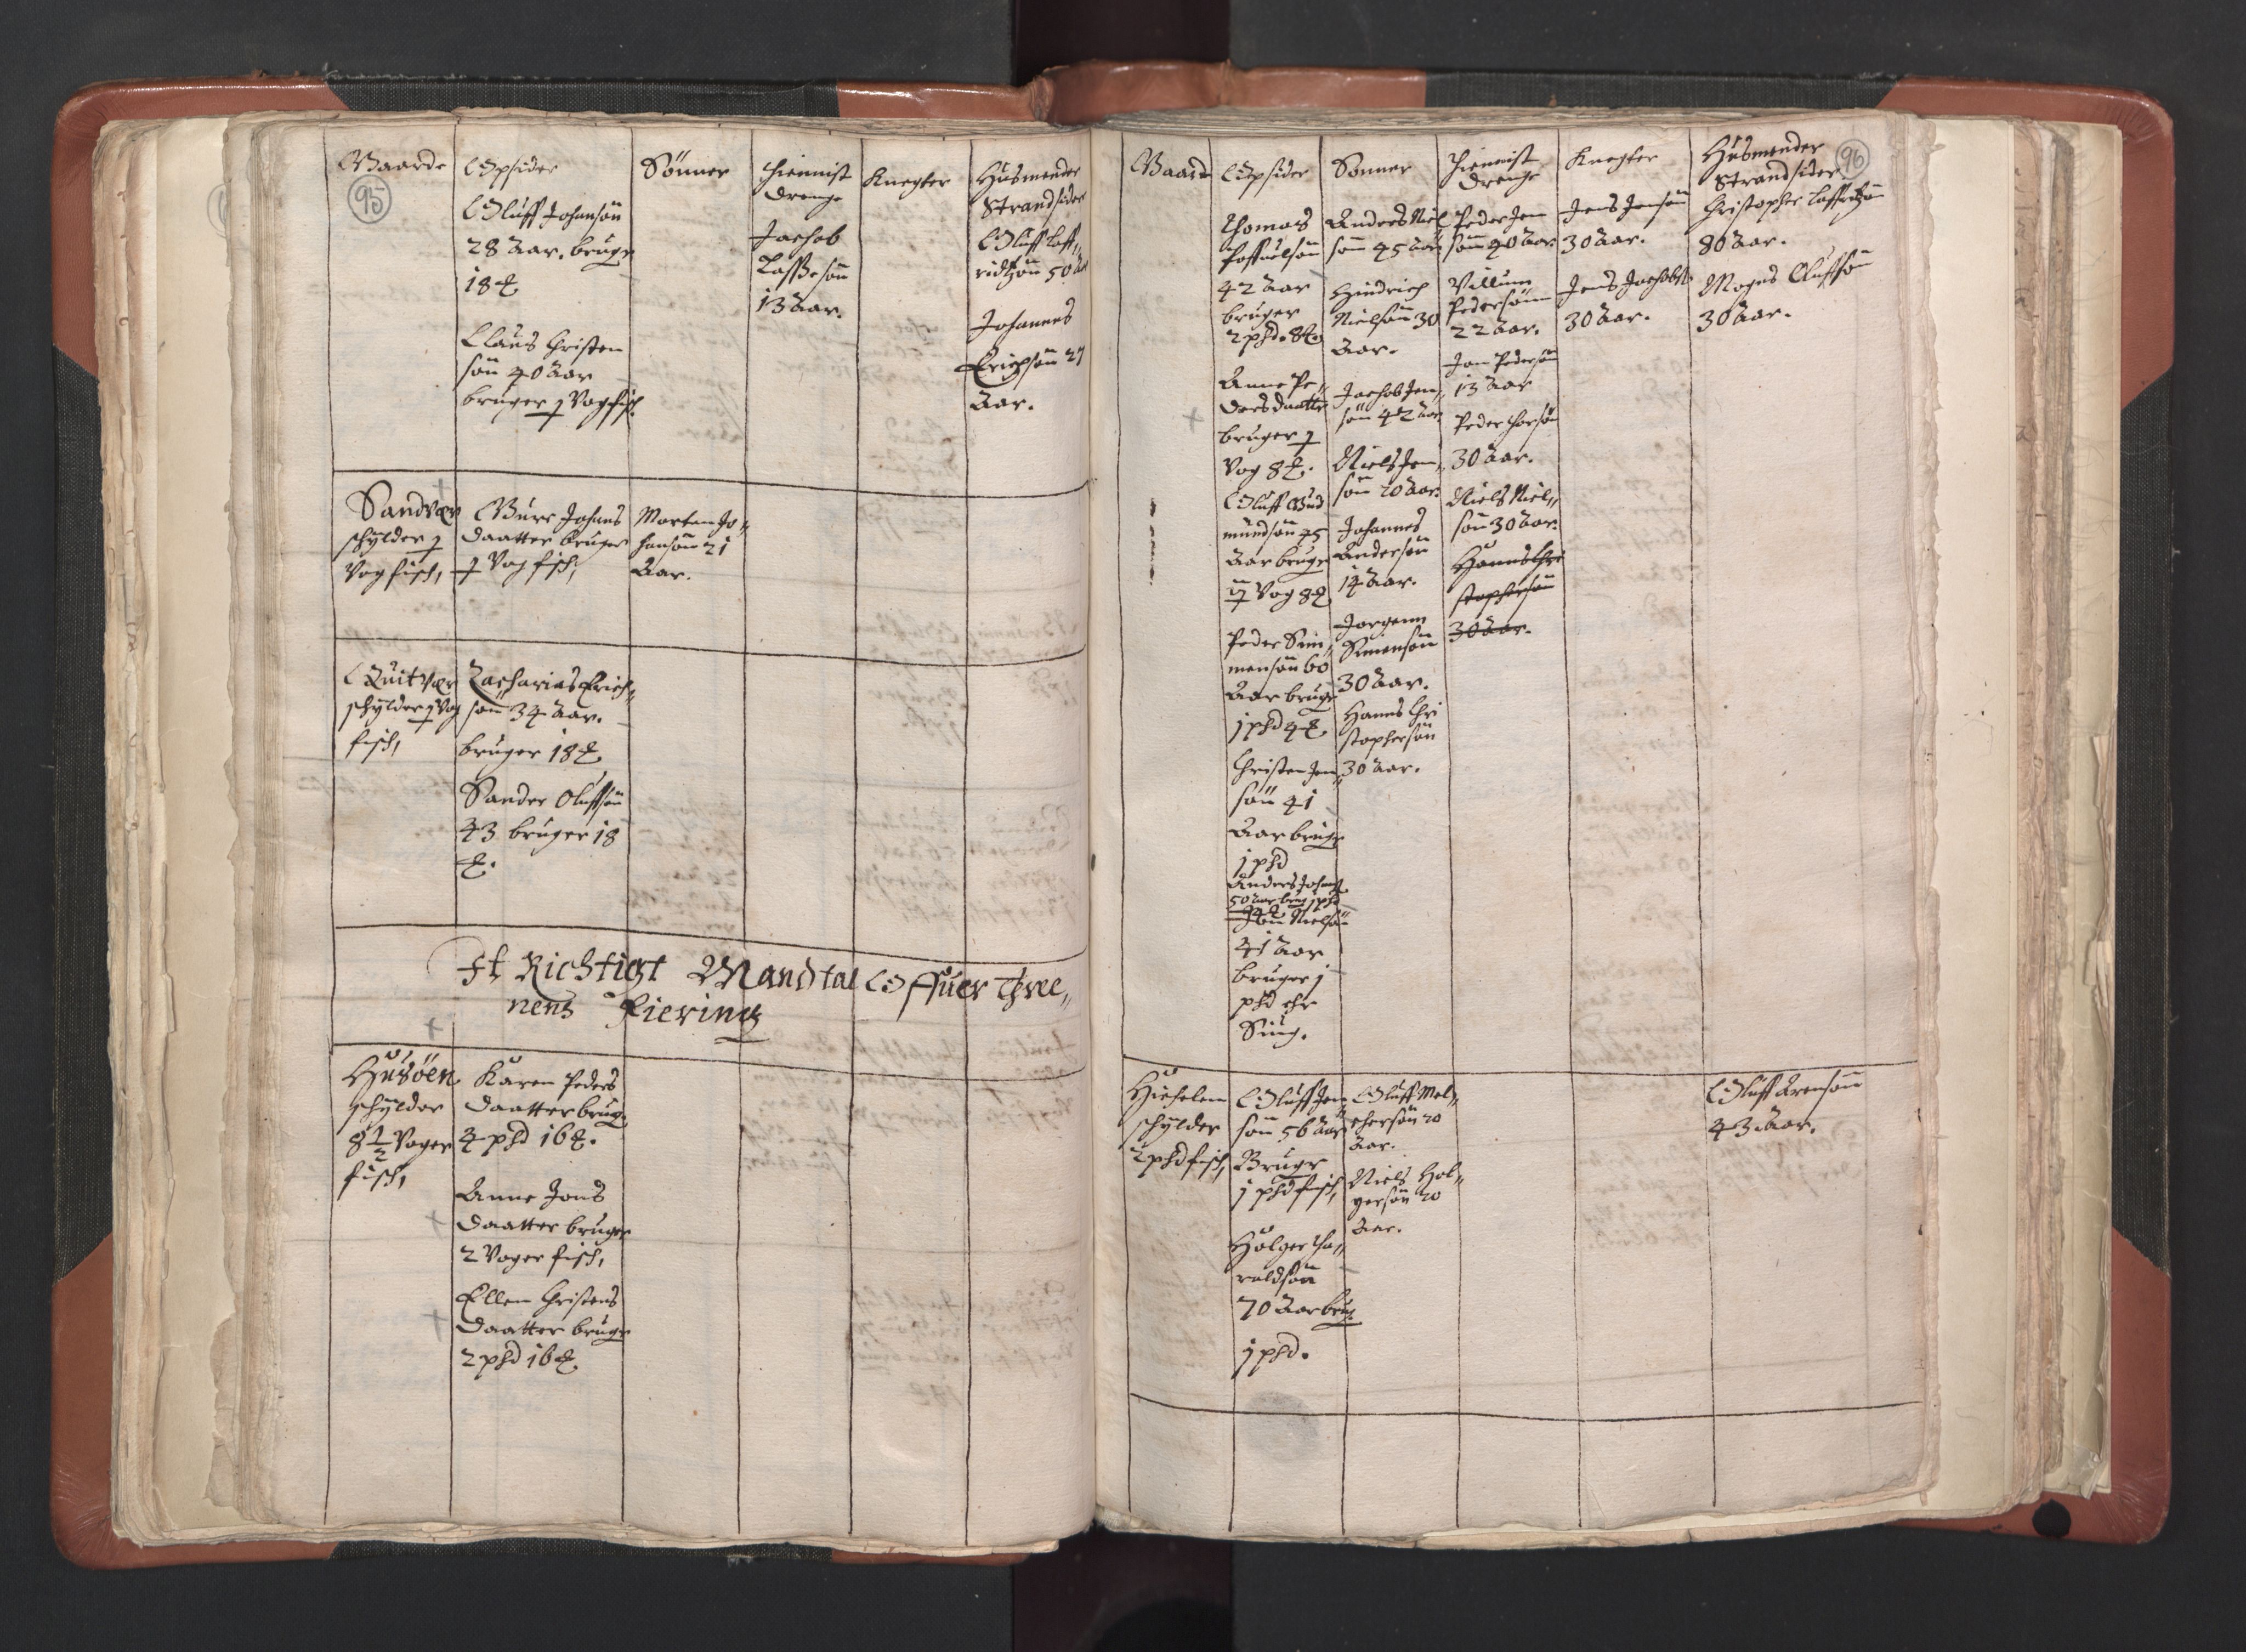 RA, Vicar's Census 1664-1666, no. 35: Helgeland deanery and Salten deanery, 1664-1666, p. 95-96